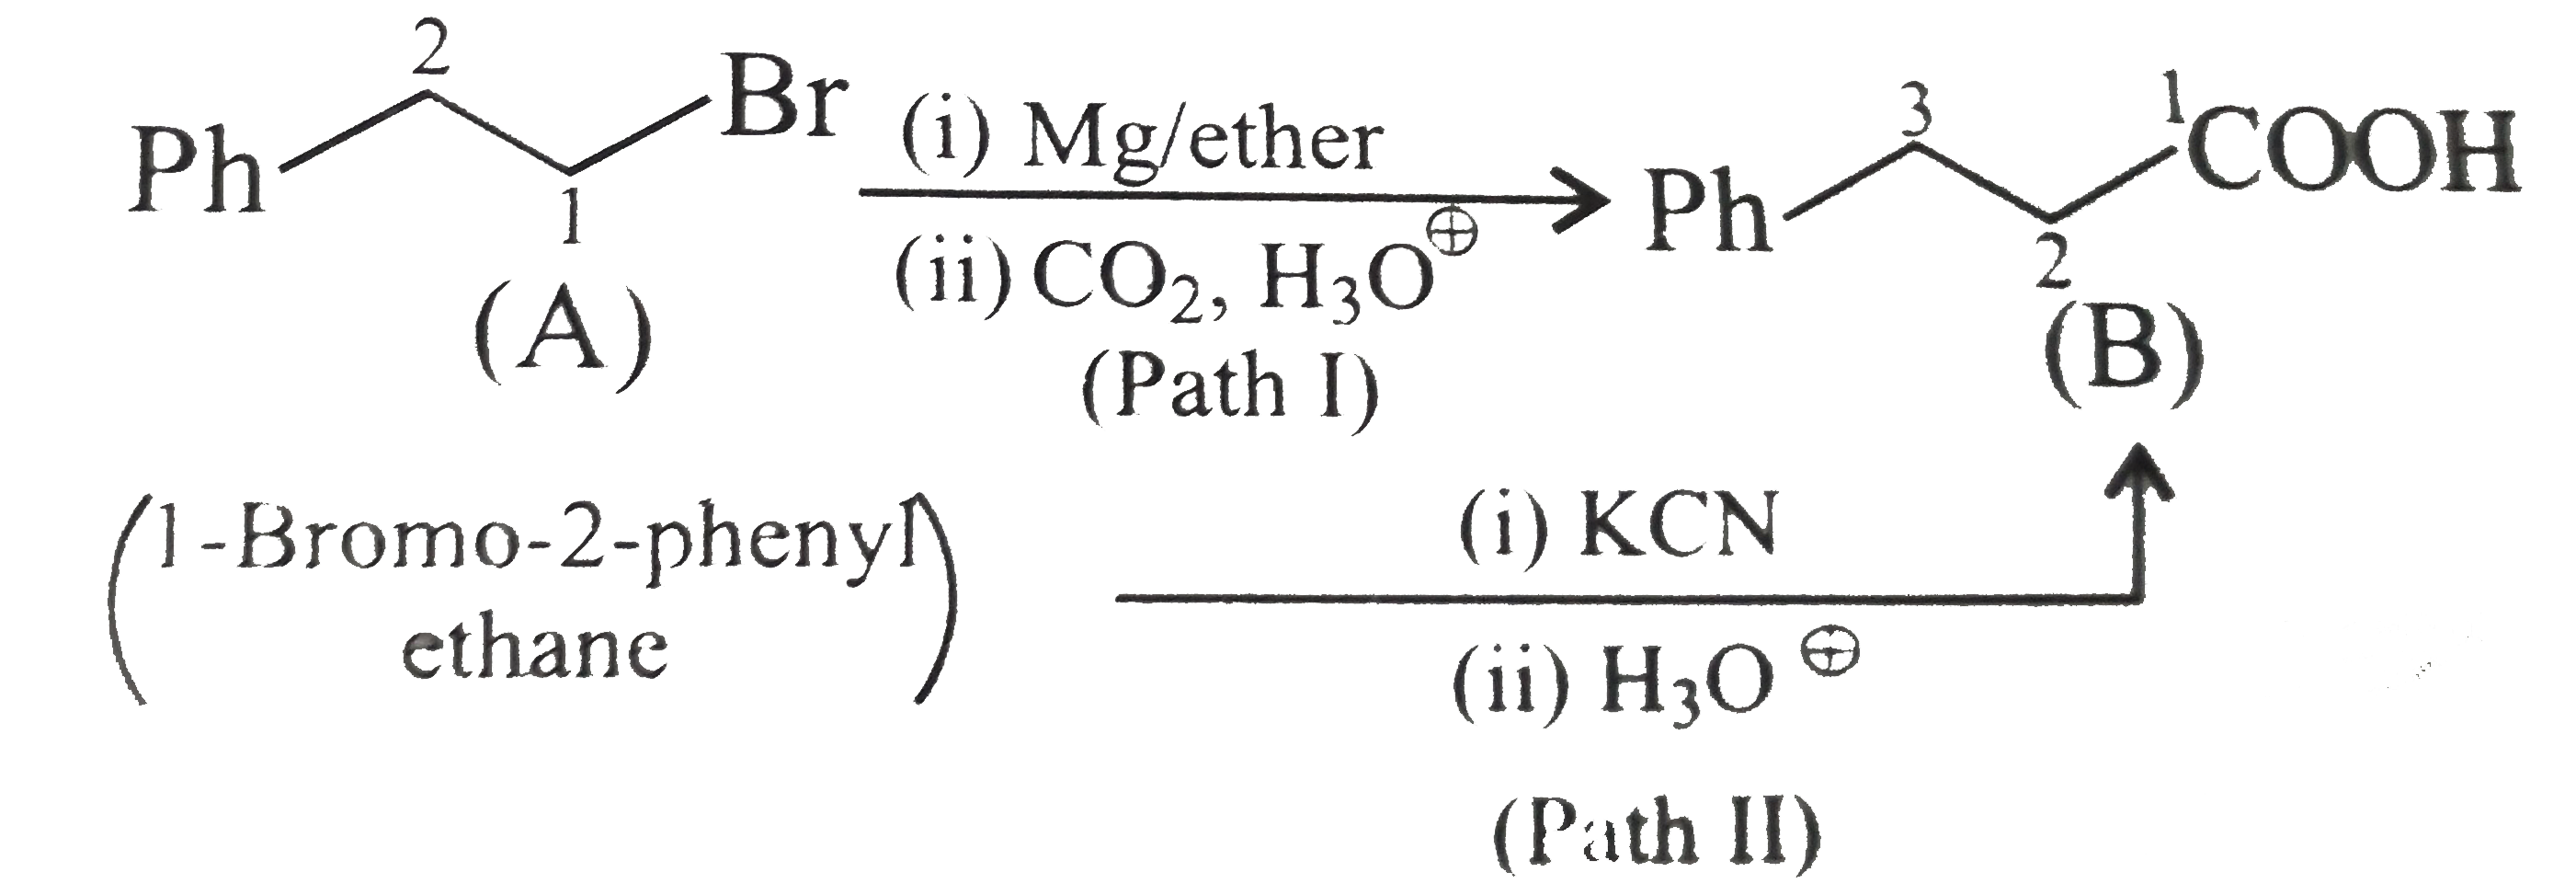 3-Phenol propanic acid (B) can be prepared by both nitrile and carbonation method as shown.      Path I gives a good yield of (B).   overset (Ө) C N initiates elimination reaction.